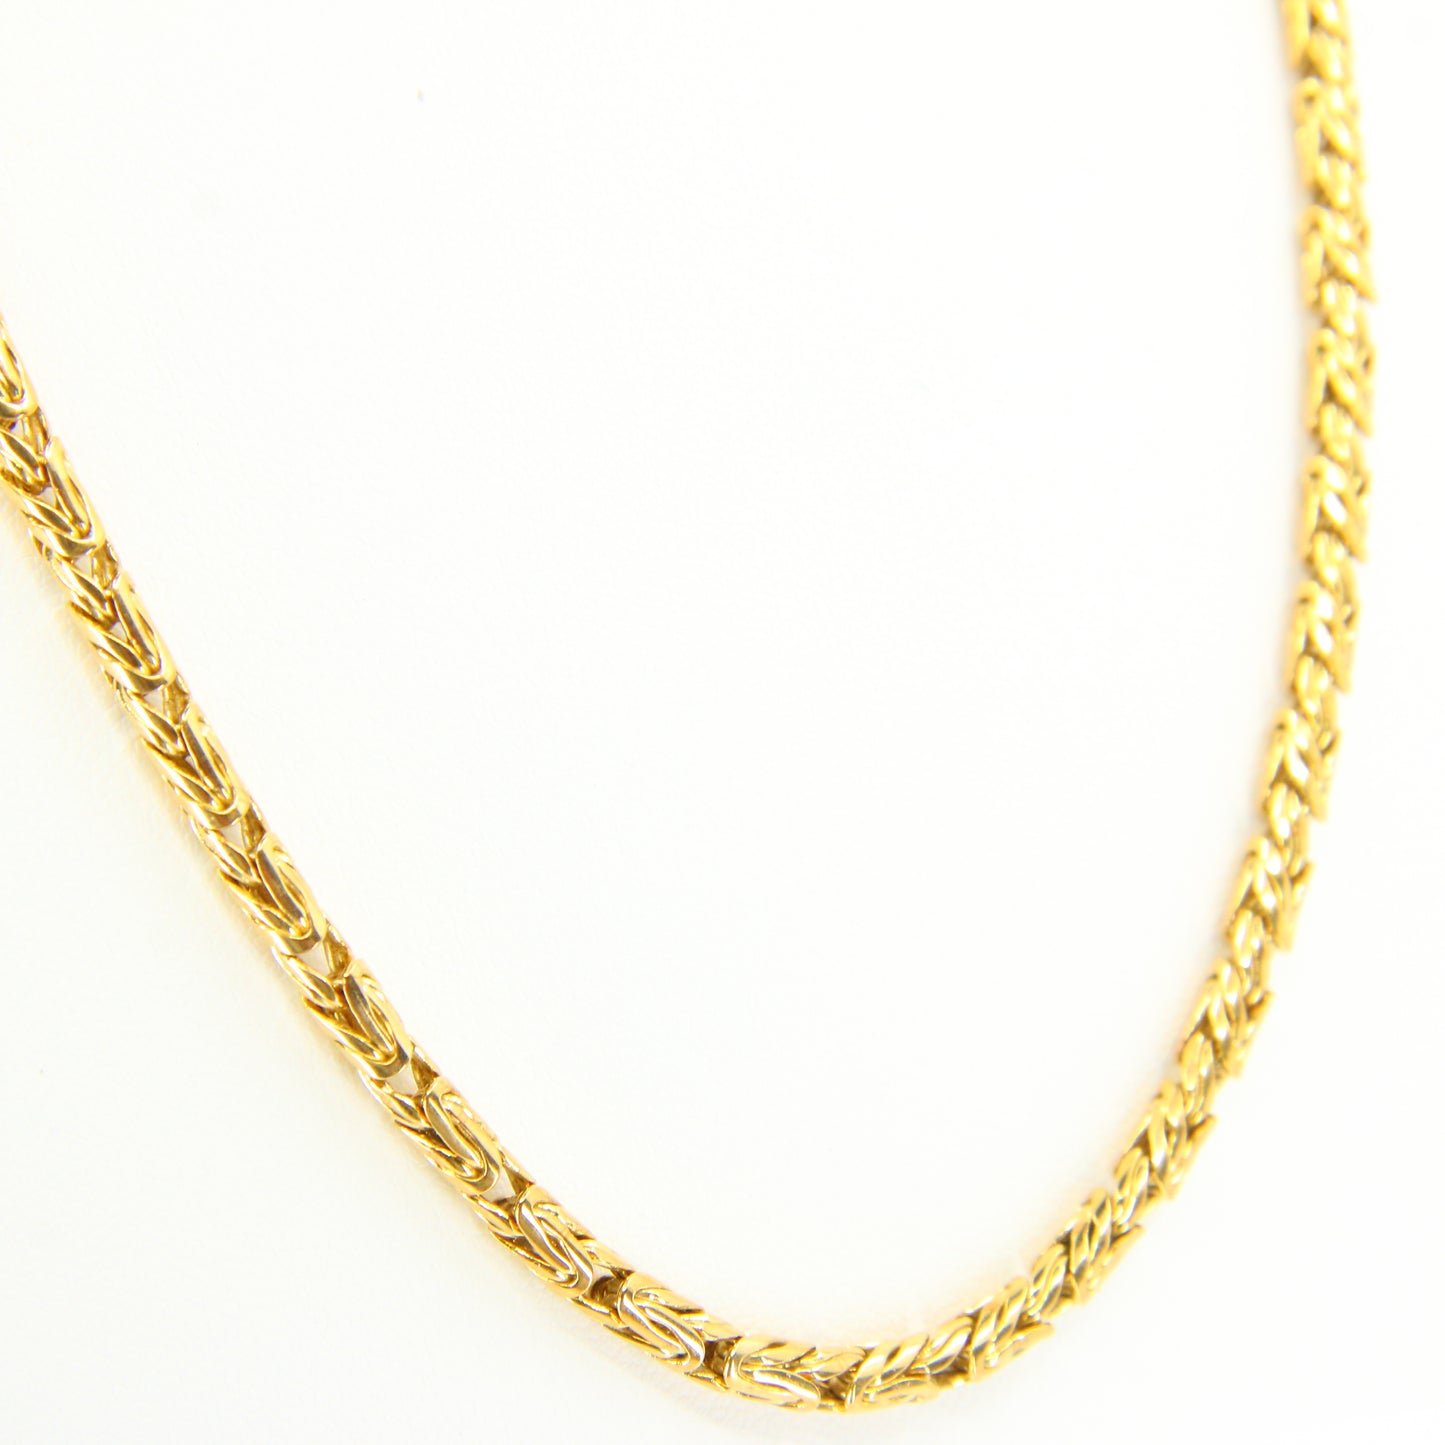 Vintage 9ct Wheat Chain Necklace Fancy 9 Carat Solid Yellow Gold Wheat Chain